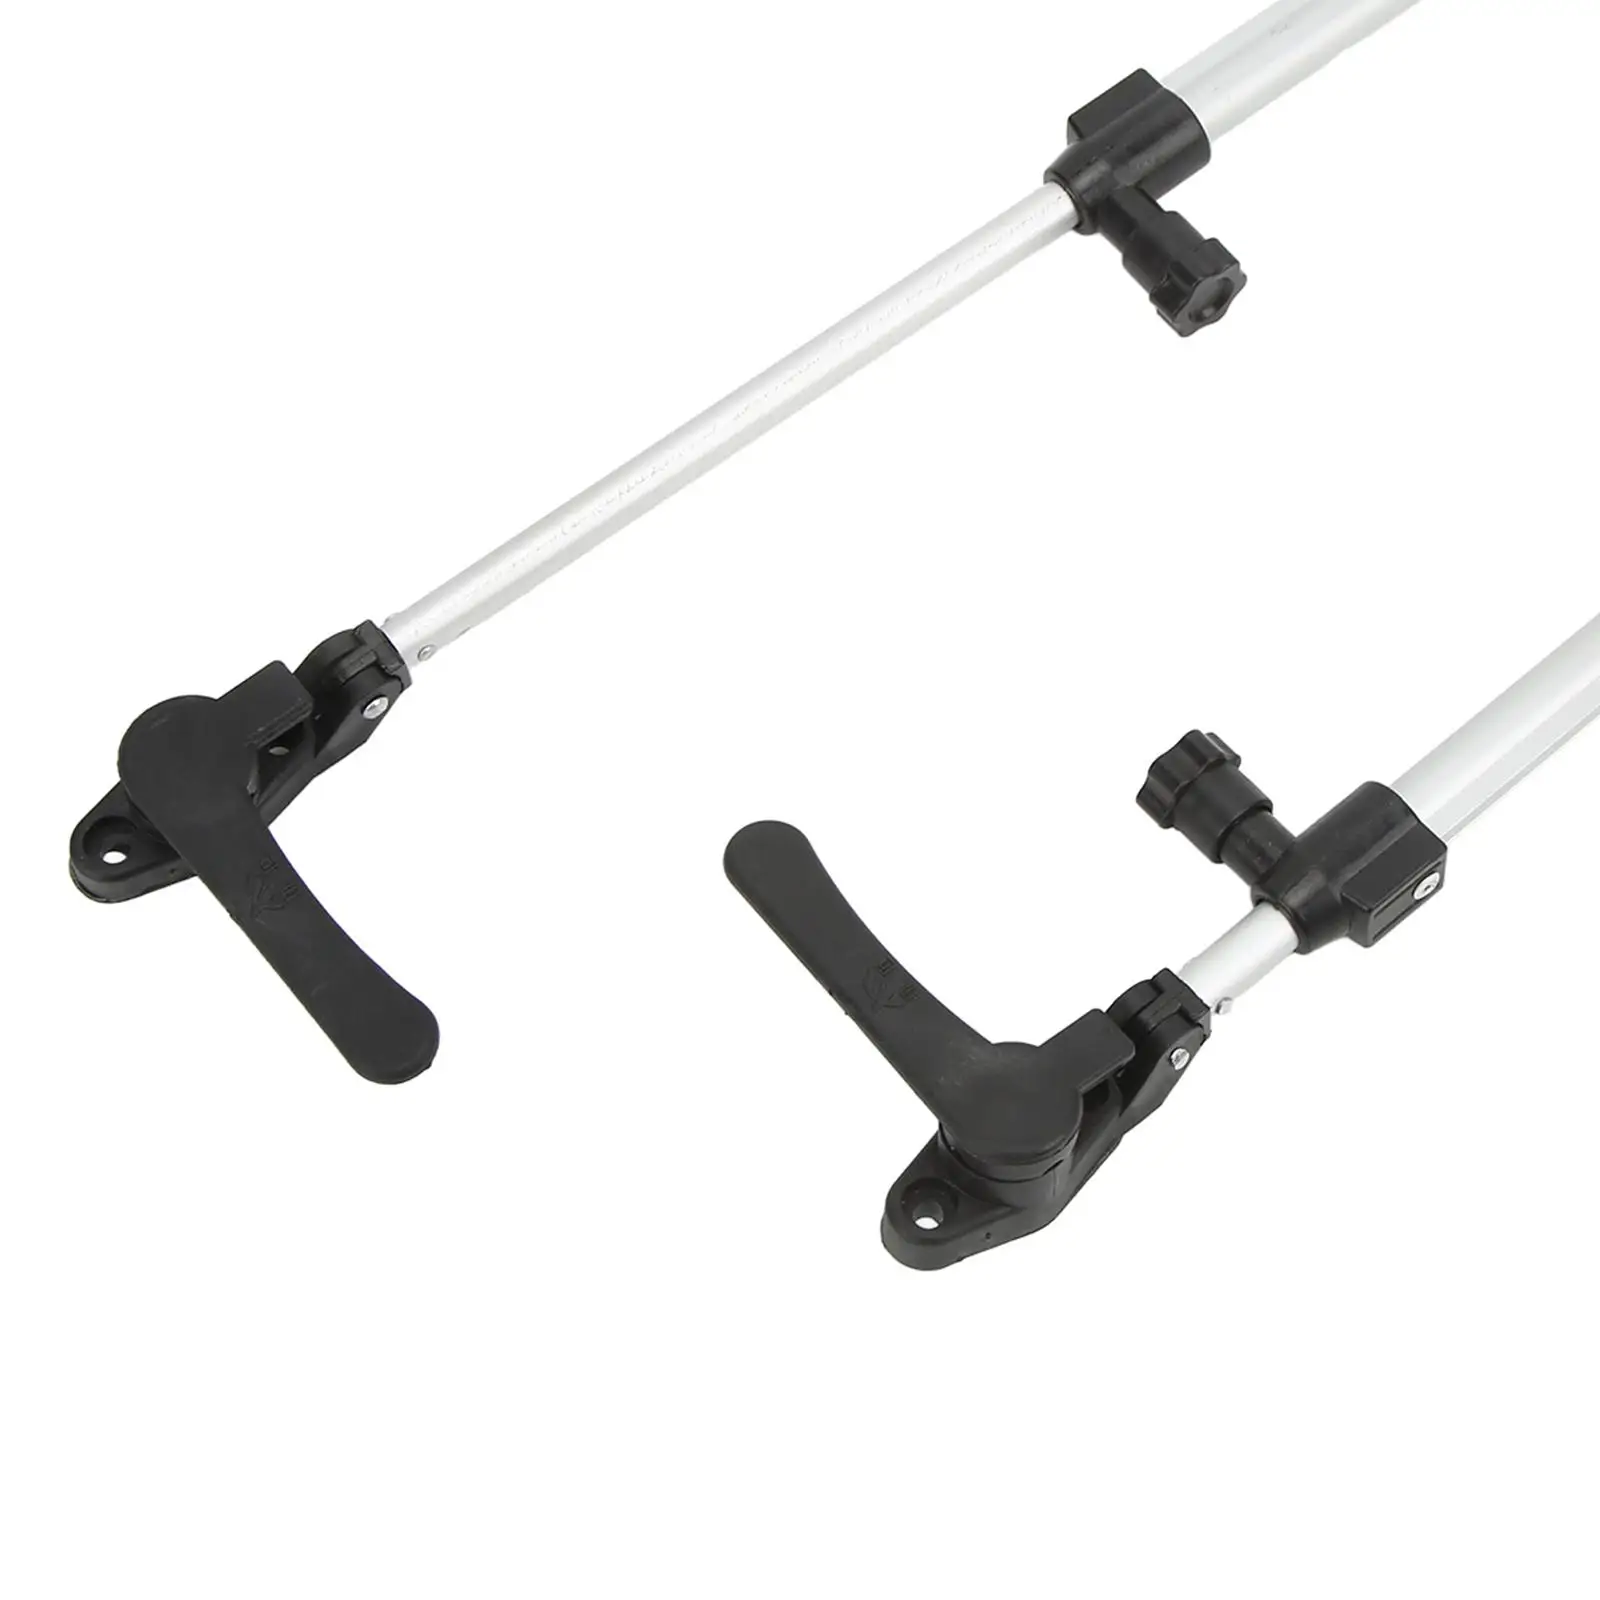 2Pcs RV Window Support Rod Telescopic Arm for Trailer Camper